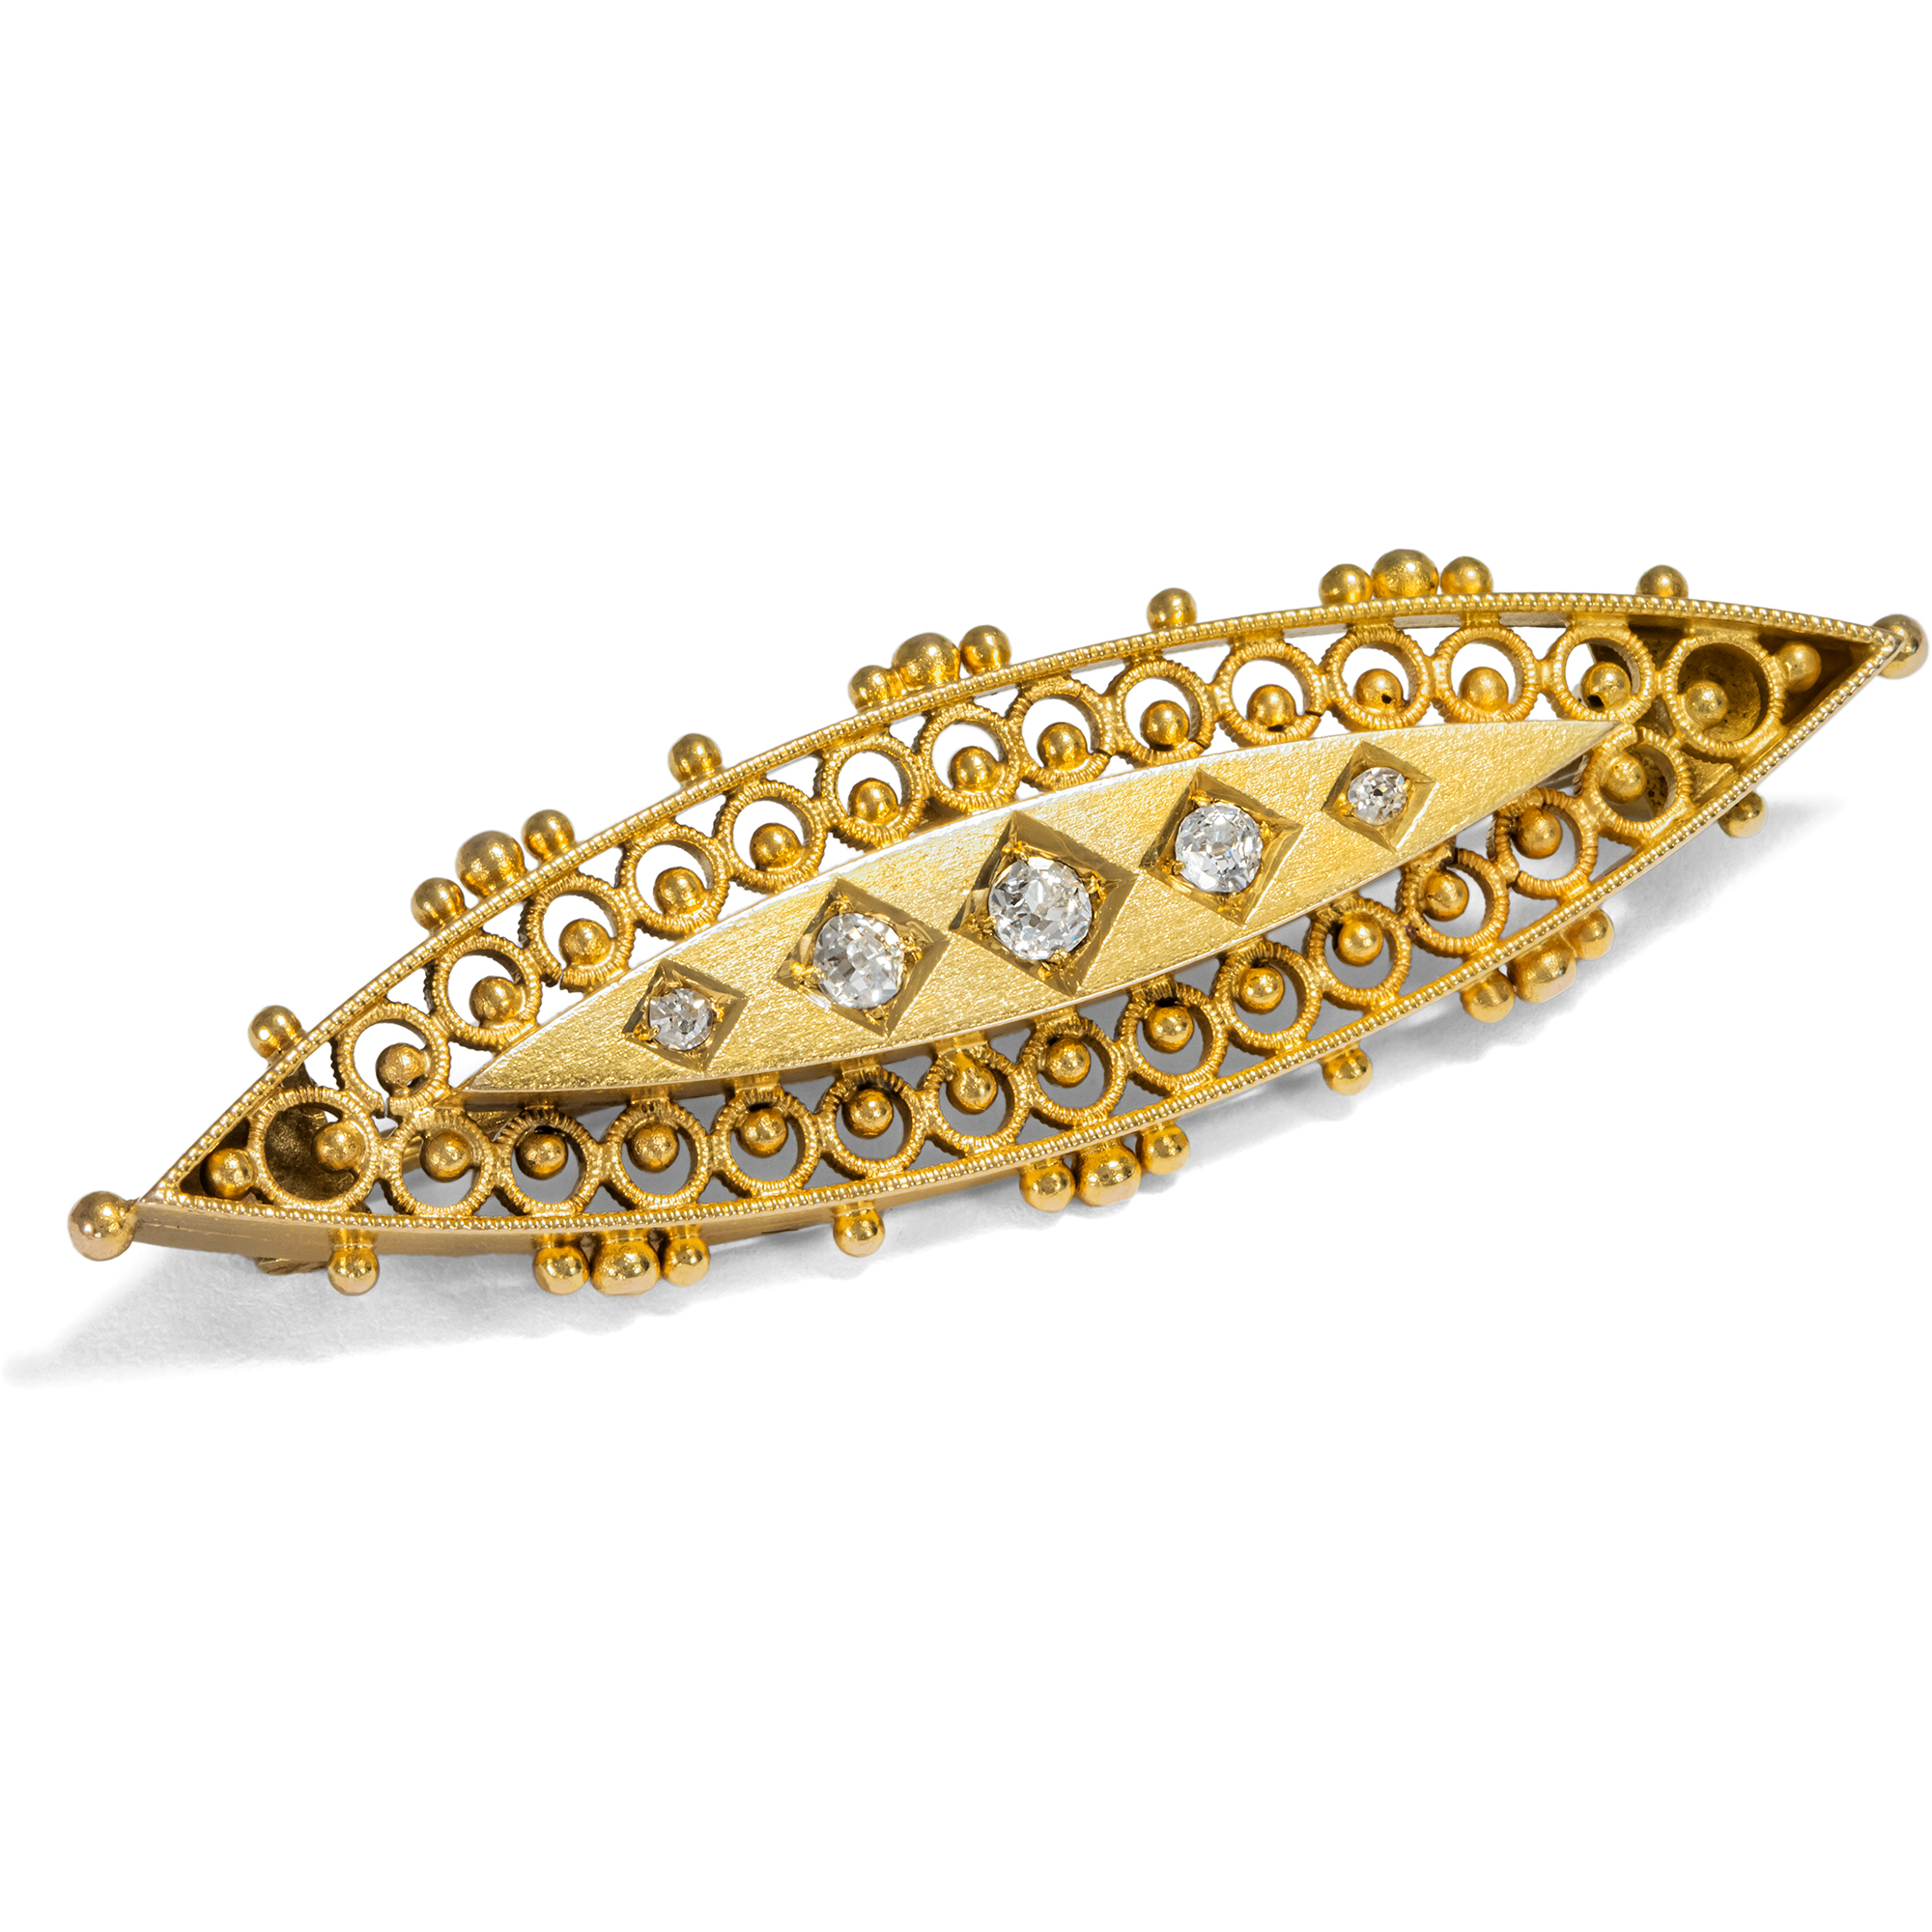 Magnificent Brooch of Historicism With Diamonds in Gold, Circa 1885